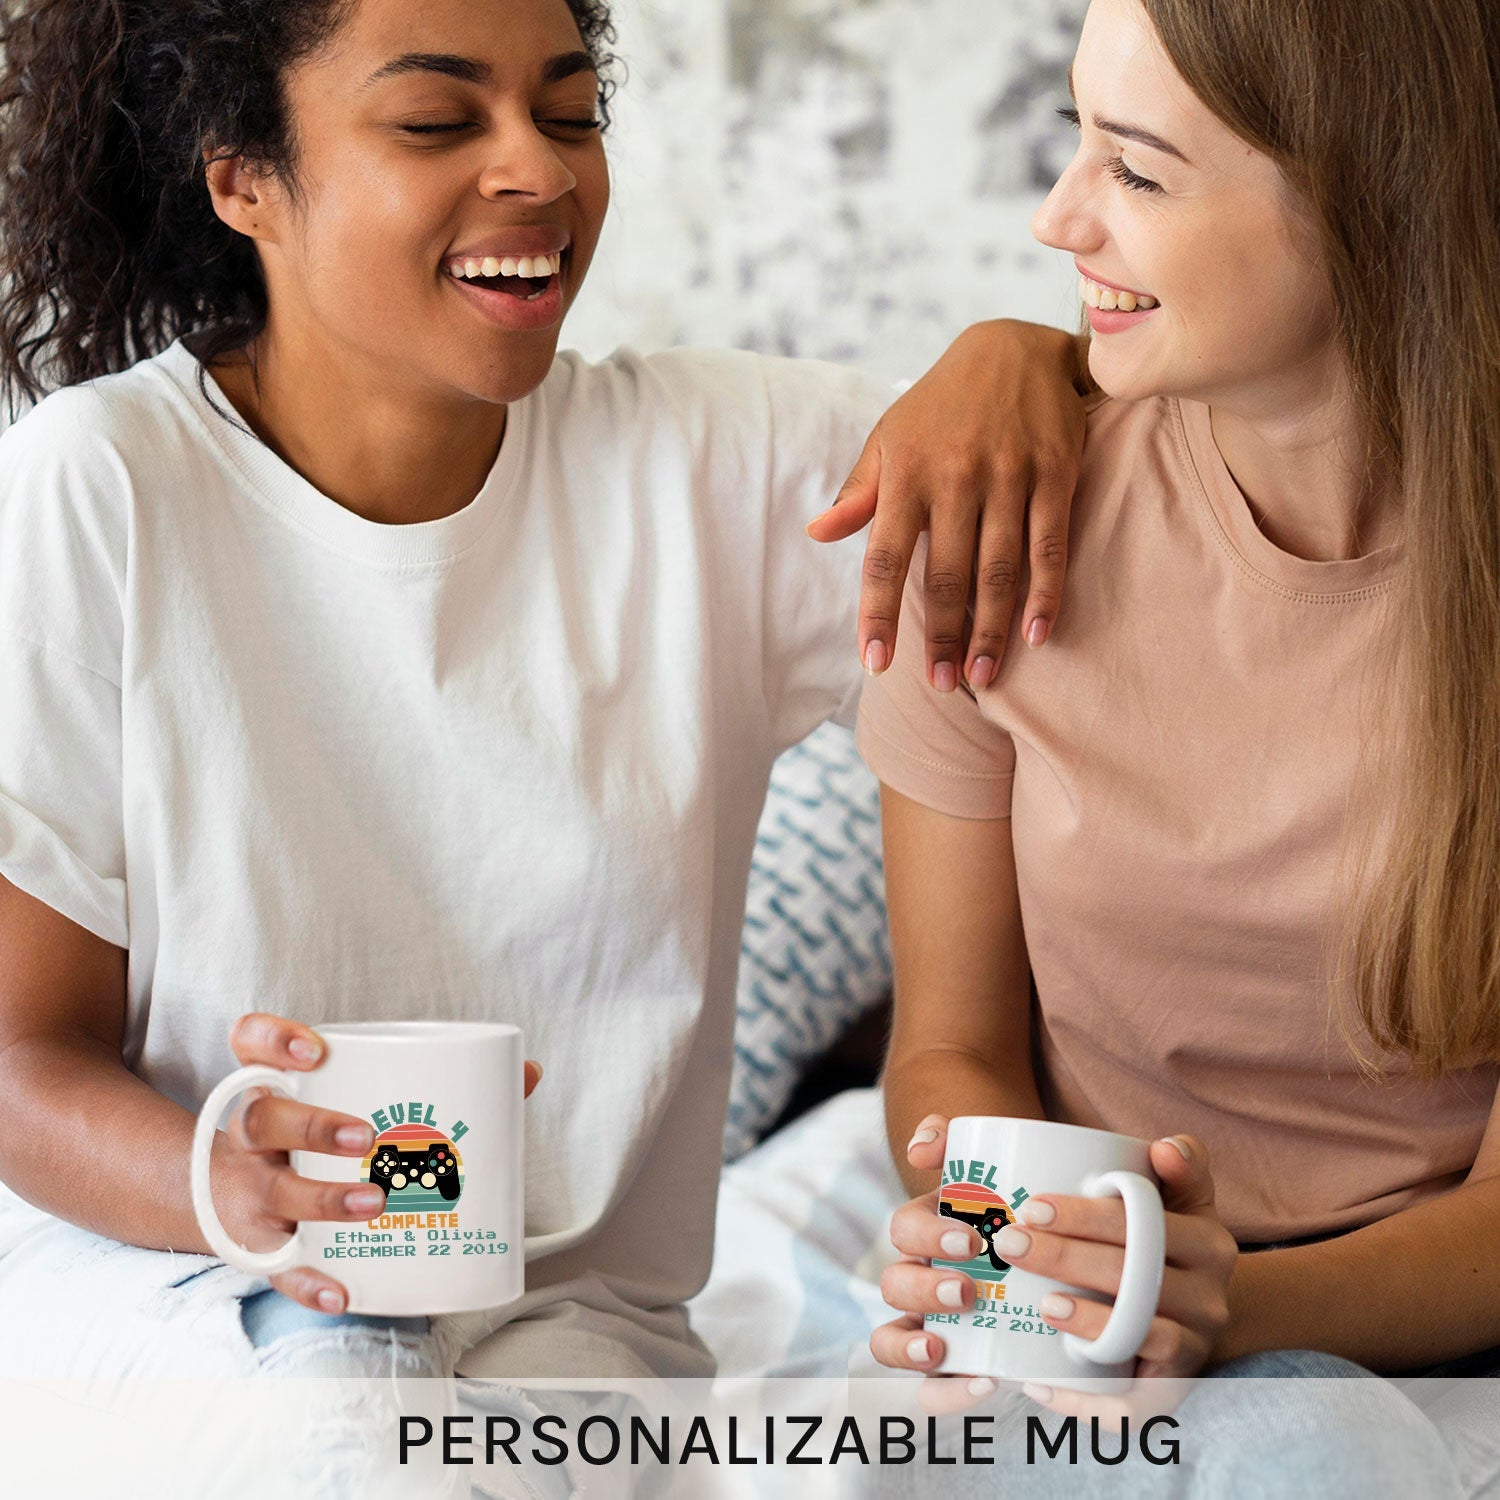 Level 4 Complete - Personalized 4 Year Anniversary gift for him for her - Custom Mug - MyMindfulGifts